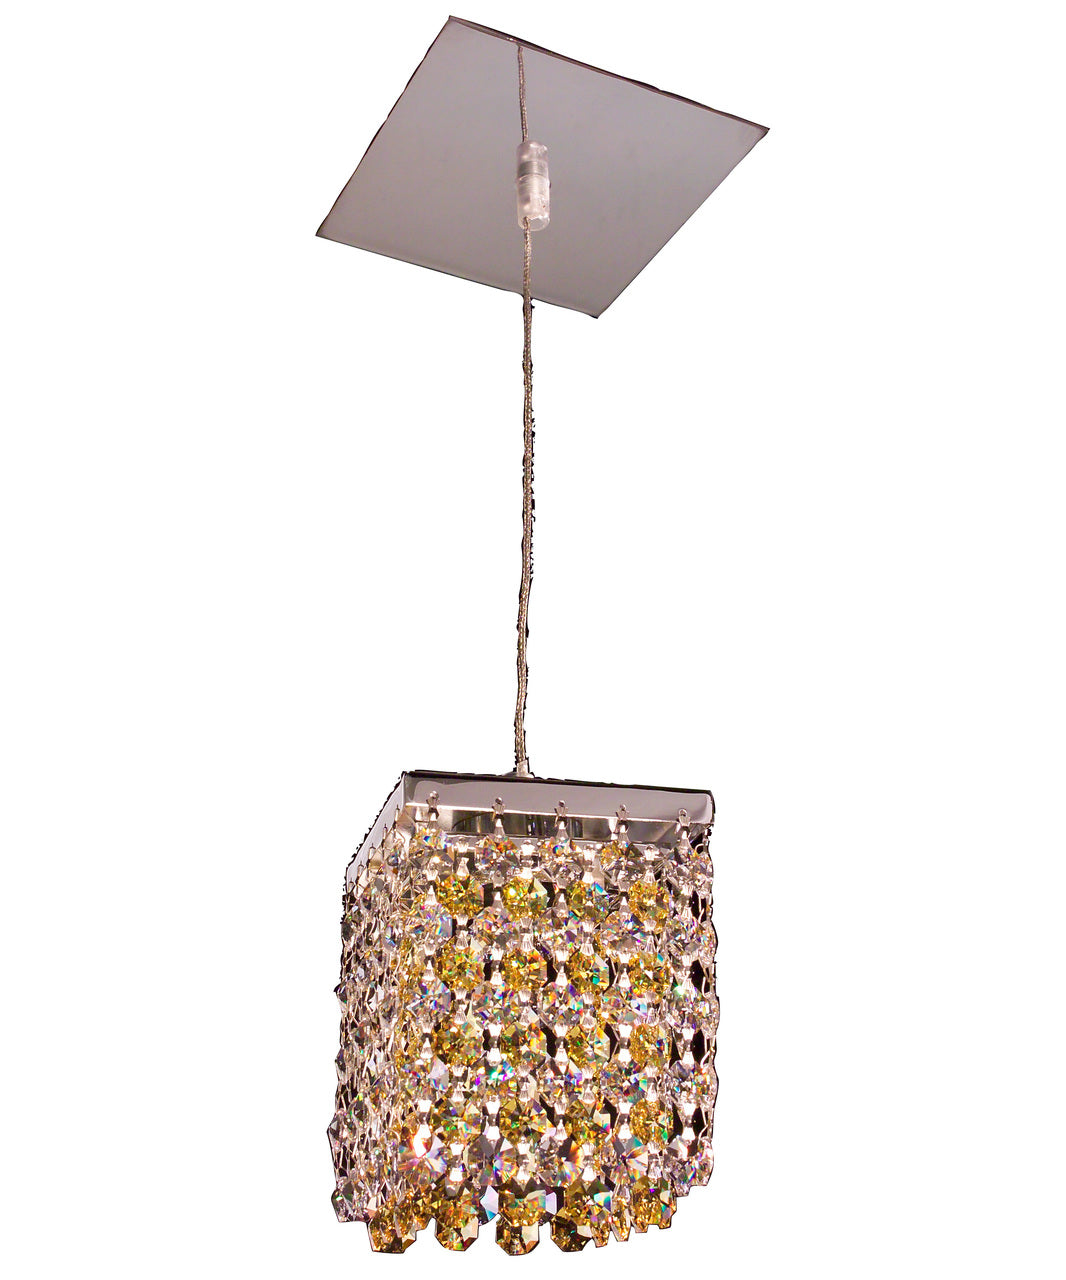 Classic Lighting 16101 S-SLT Bedazzle Crystal Pendant in Chrome